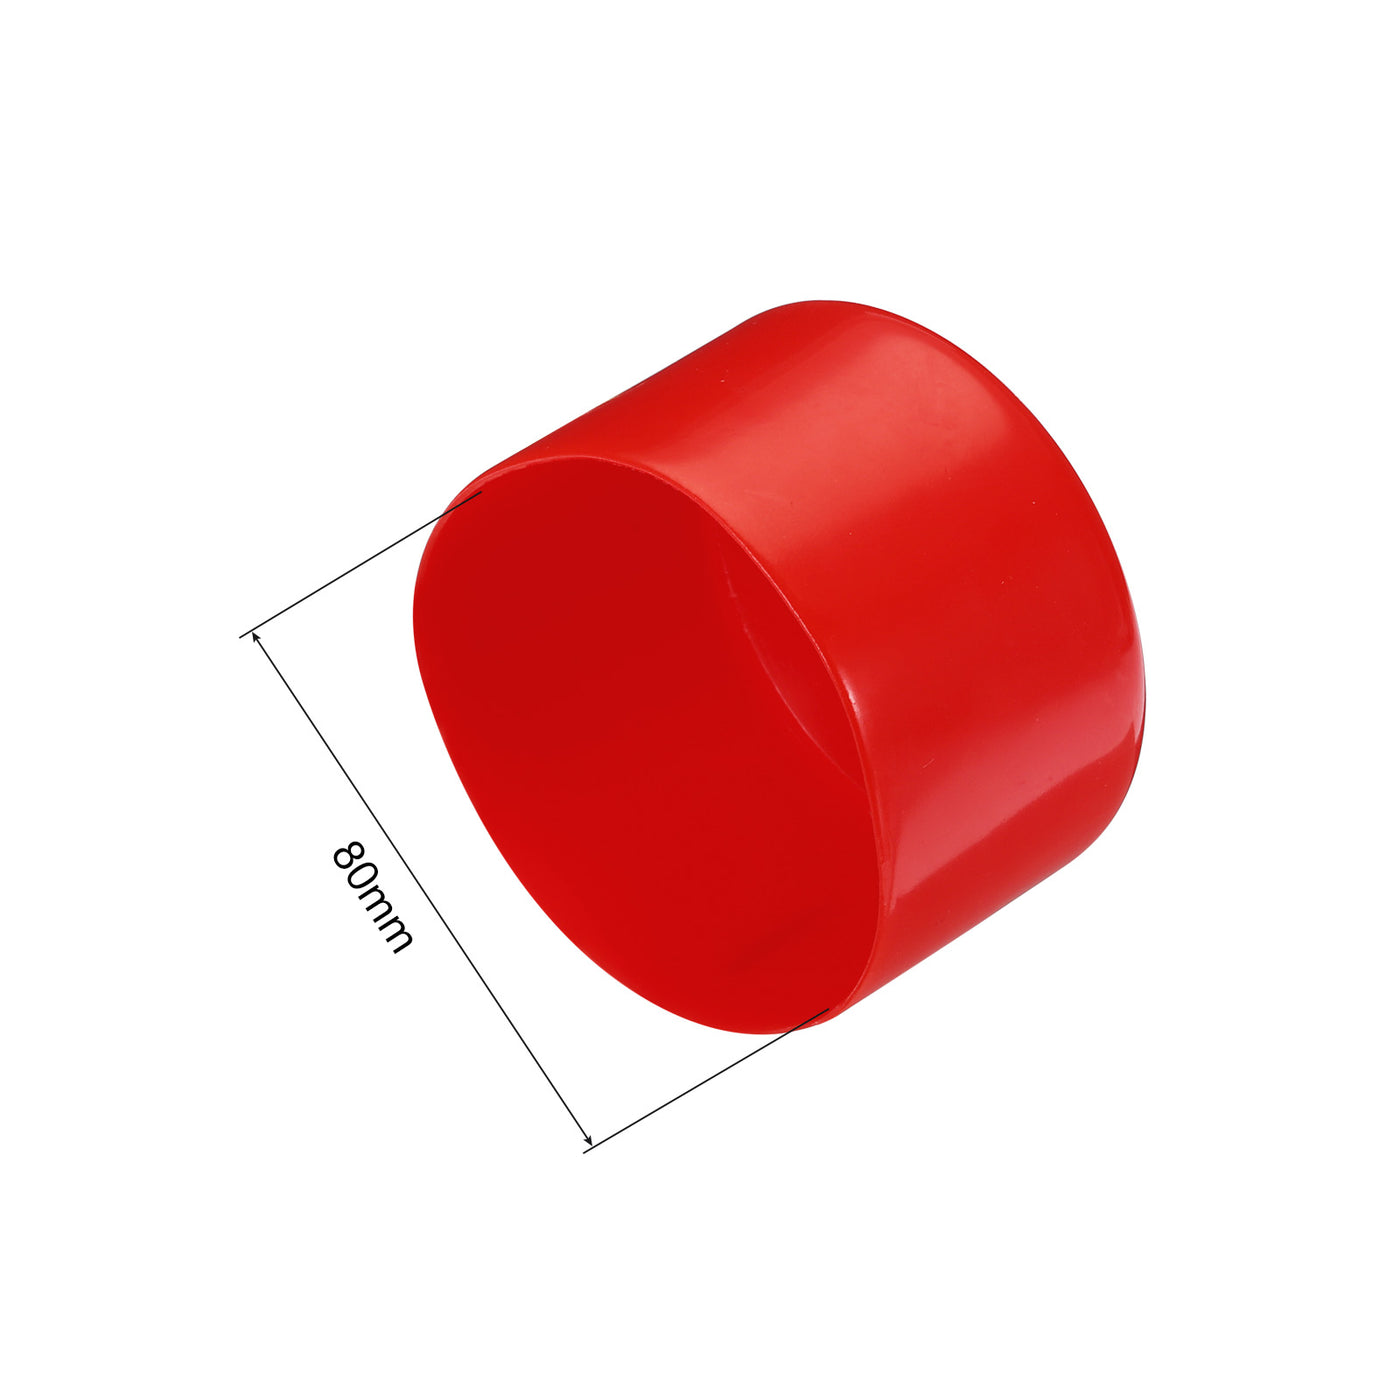 uxcell Uxcell 4pcs Rubber End Caps 80mm ID Vinyl Round Tube Bolt Cap Cover Screw Thread Protectors Red